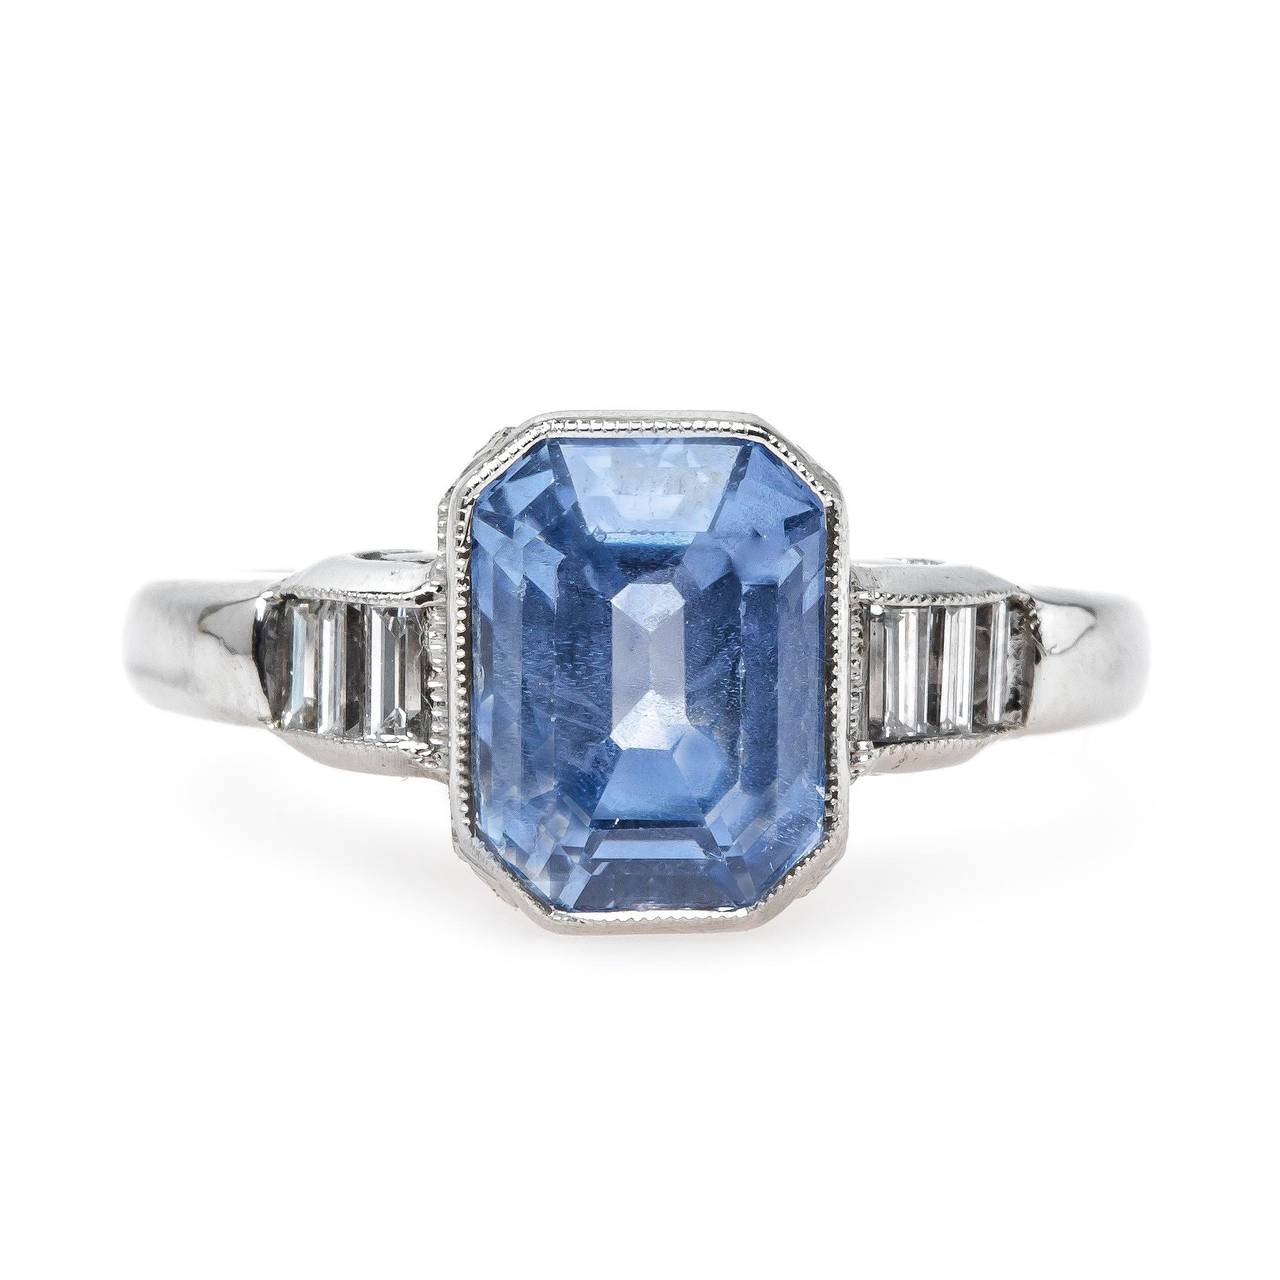 Malibu is an impressive authentic Mid Century (circa 1950) platinum ring centering a single bezel set cornflower blue 3.46ct natural sapphire accompanied with a Guild Laboratories certificate stating the sapphire is unheated with Ceylon origin.